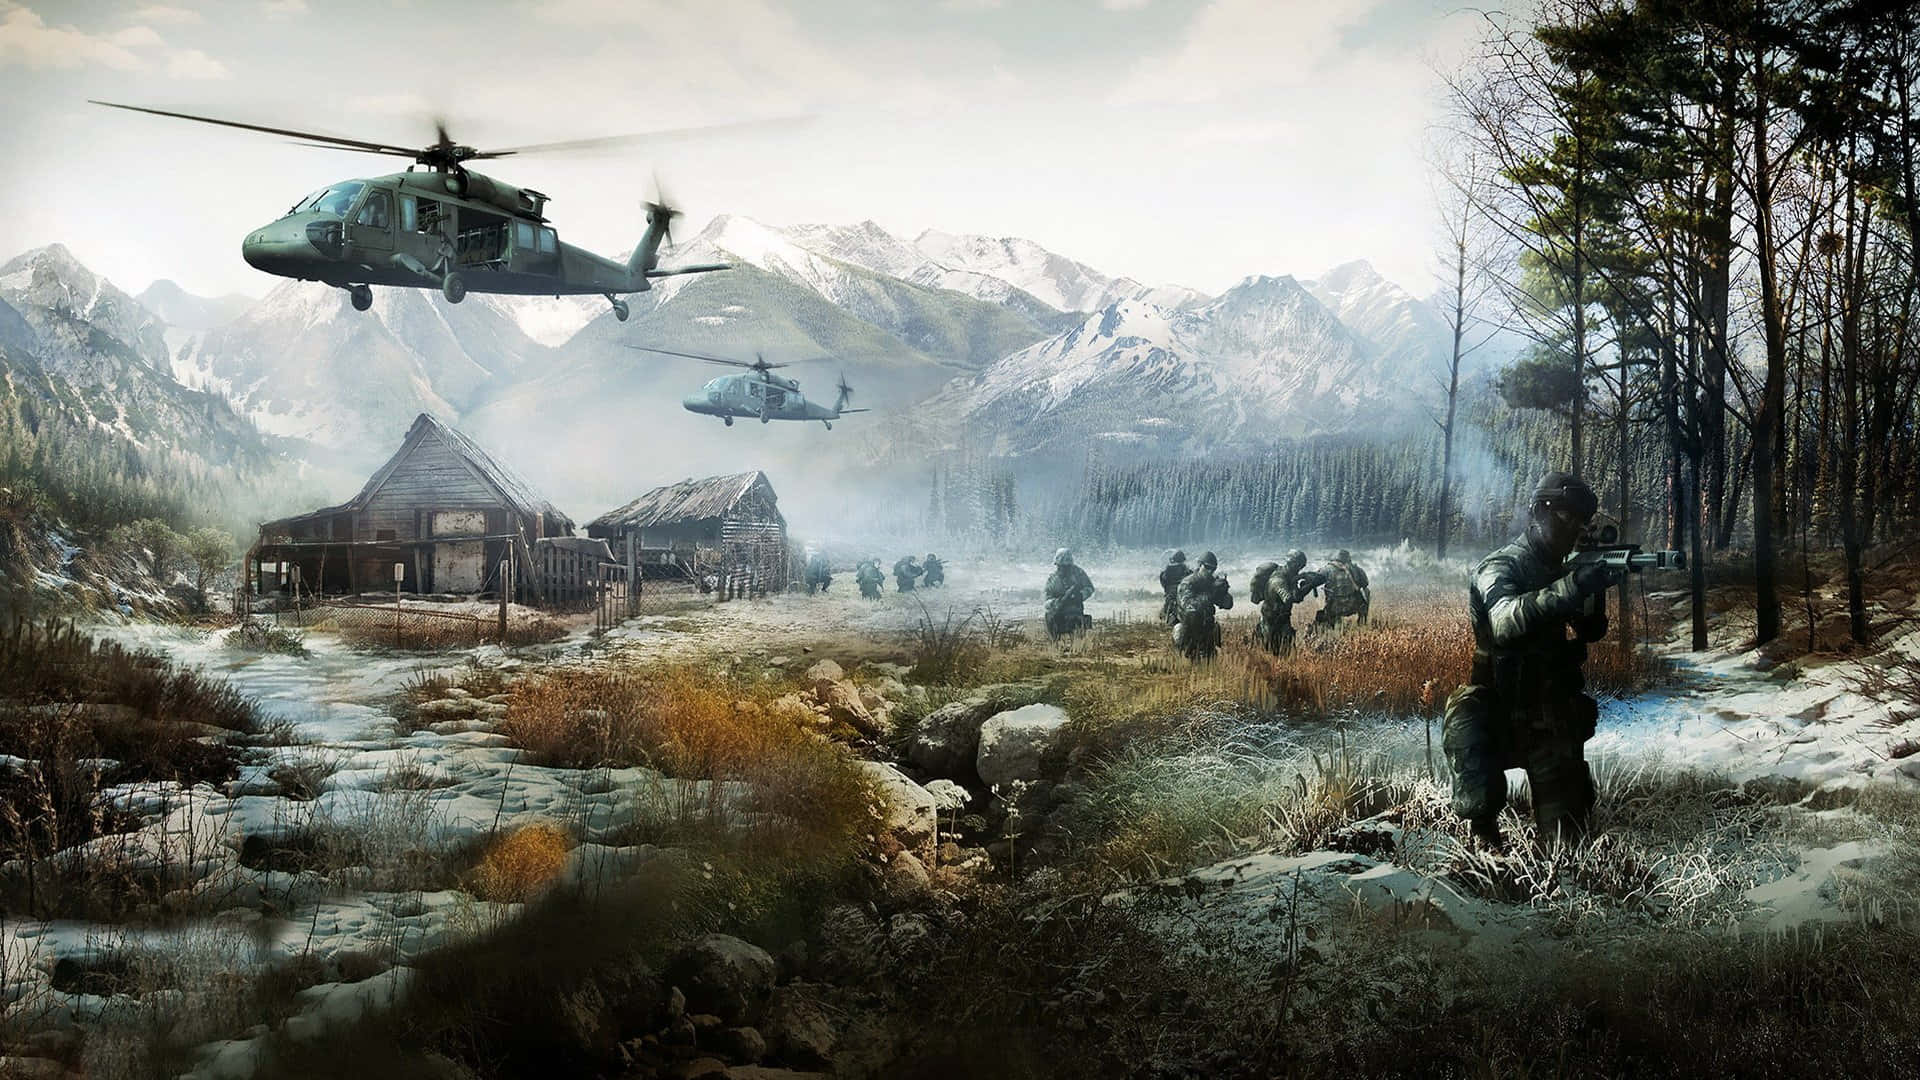 A Helicopter Is Flying Over A Mountain With Soldiers In The Background